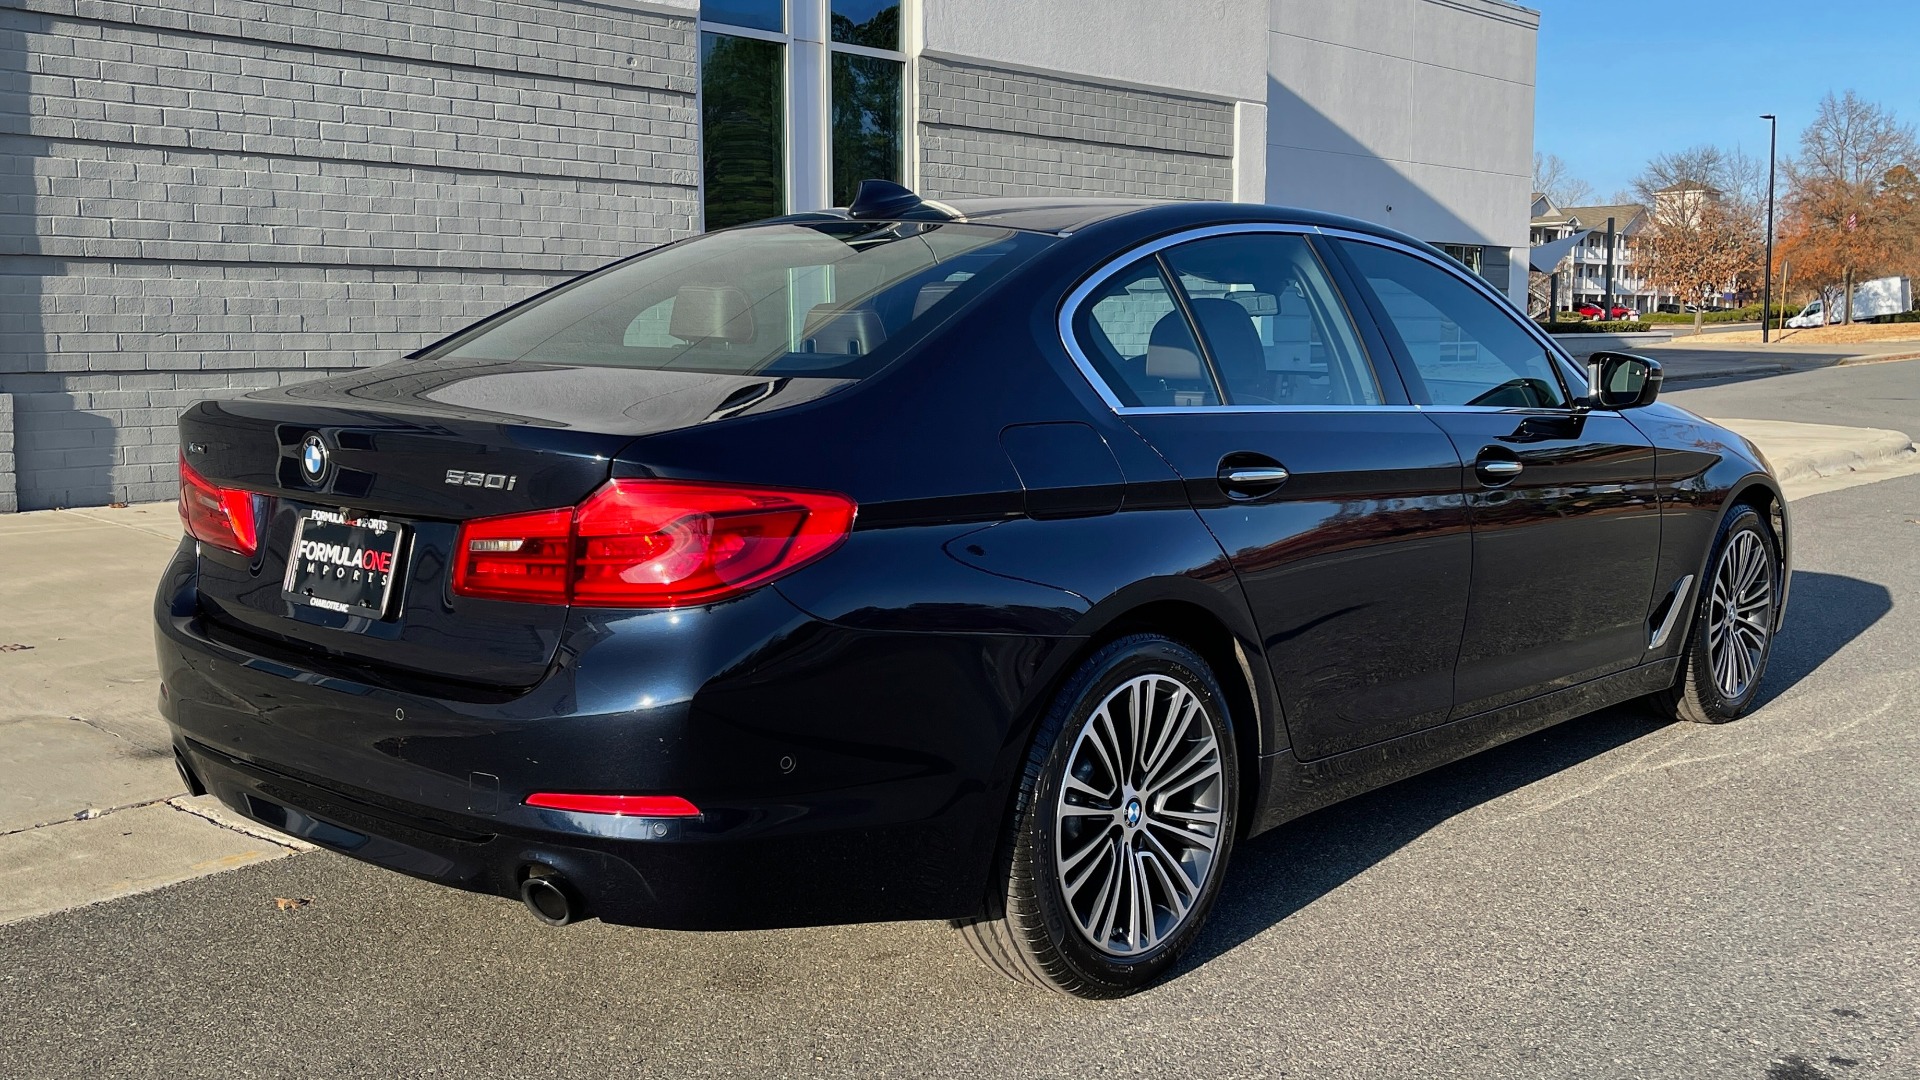 Used 2018 BMW 5 SERIES 530I XDRIVE PREMIUM / EXEC PKG / DRVR ASST PLUS / NAV / REARVIEW for sale Sold at Formula Imports in Charlotte NC 28227 10